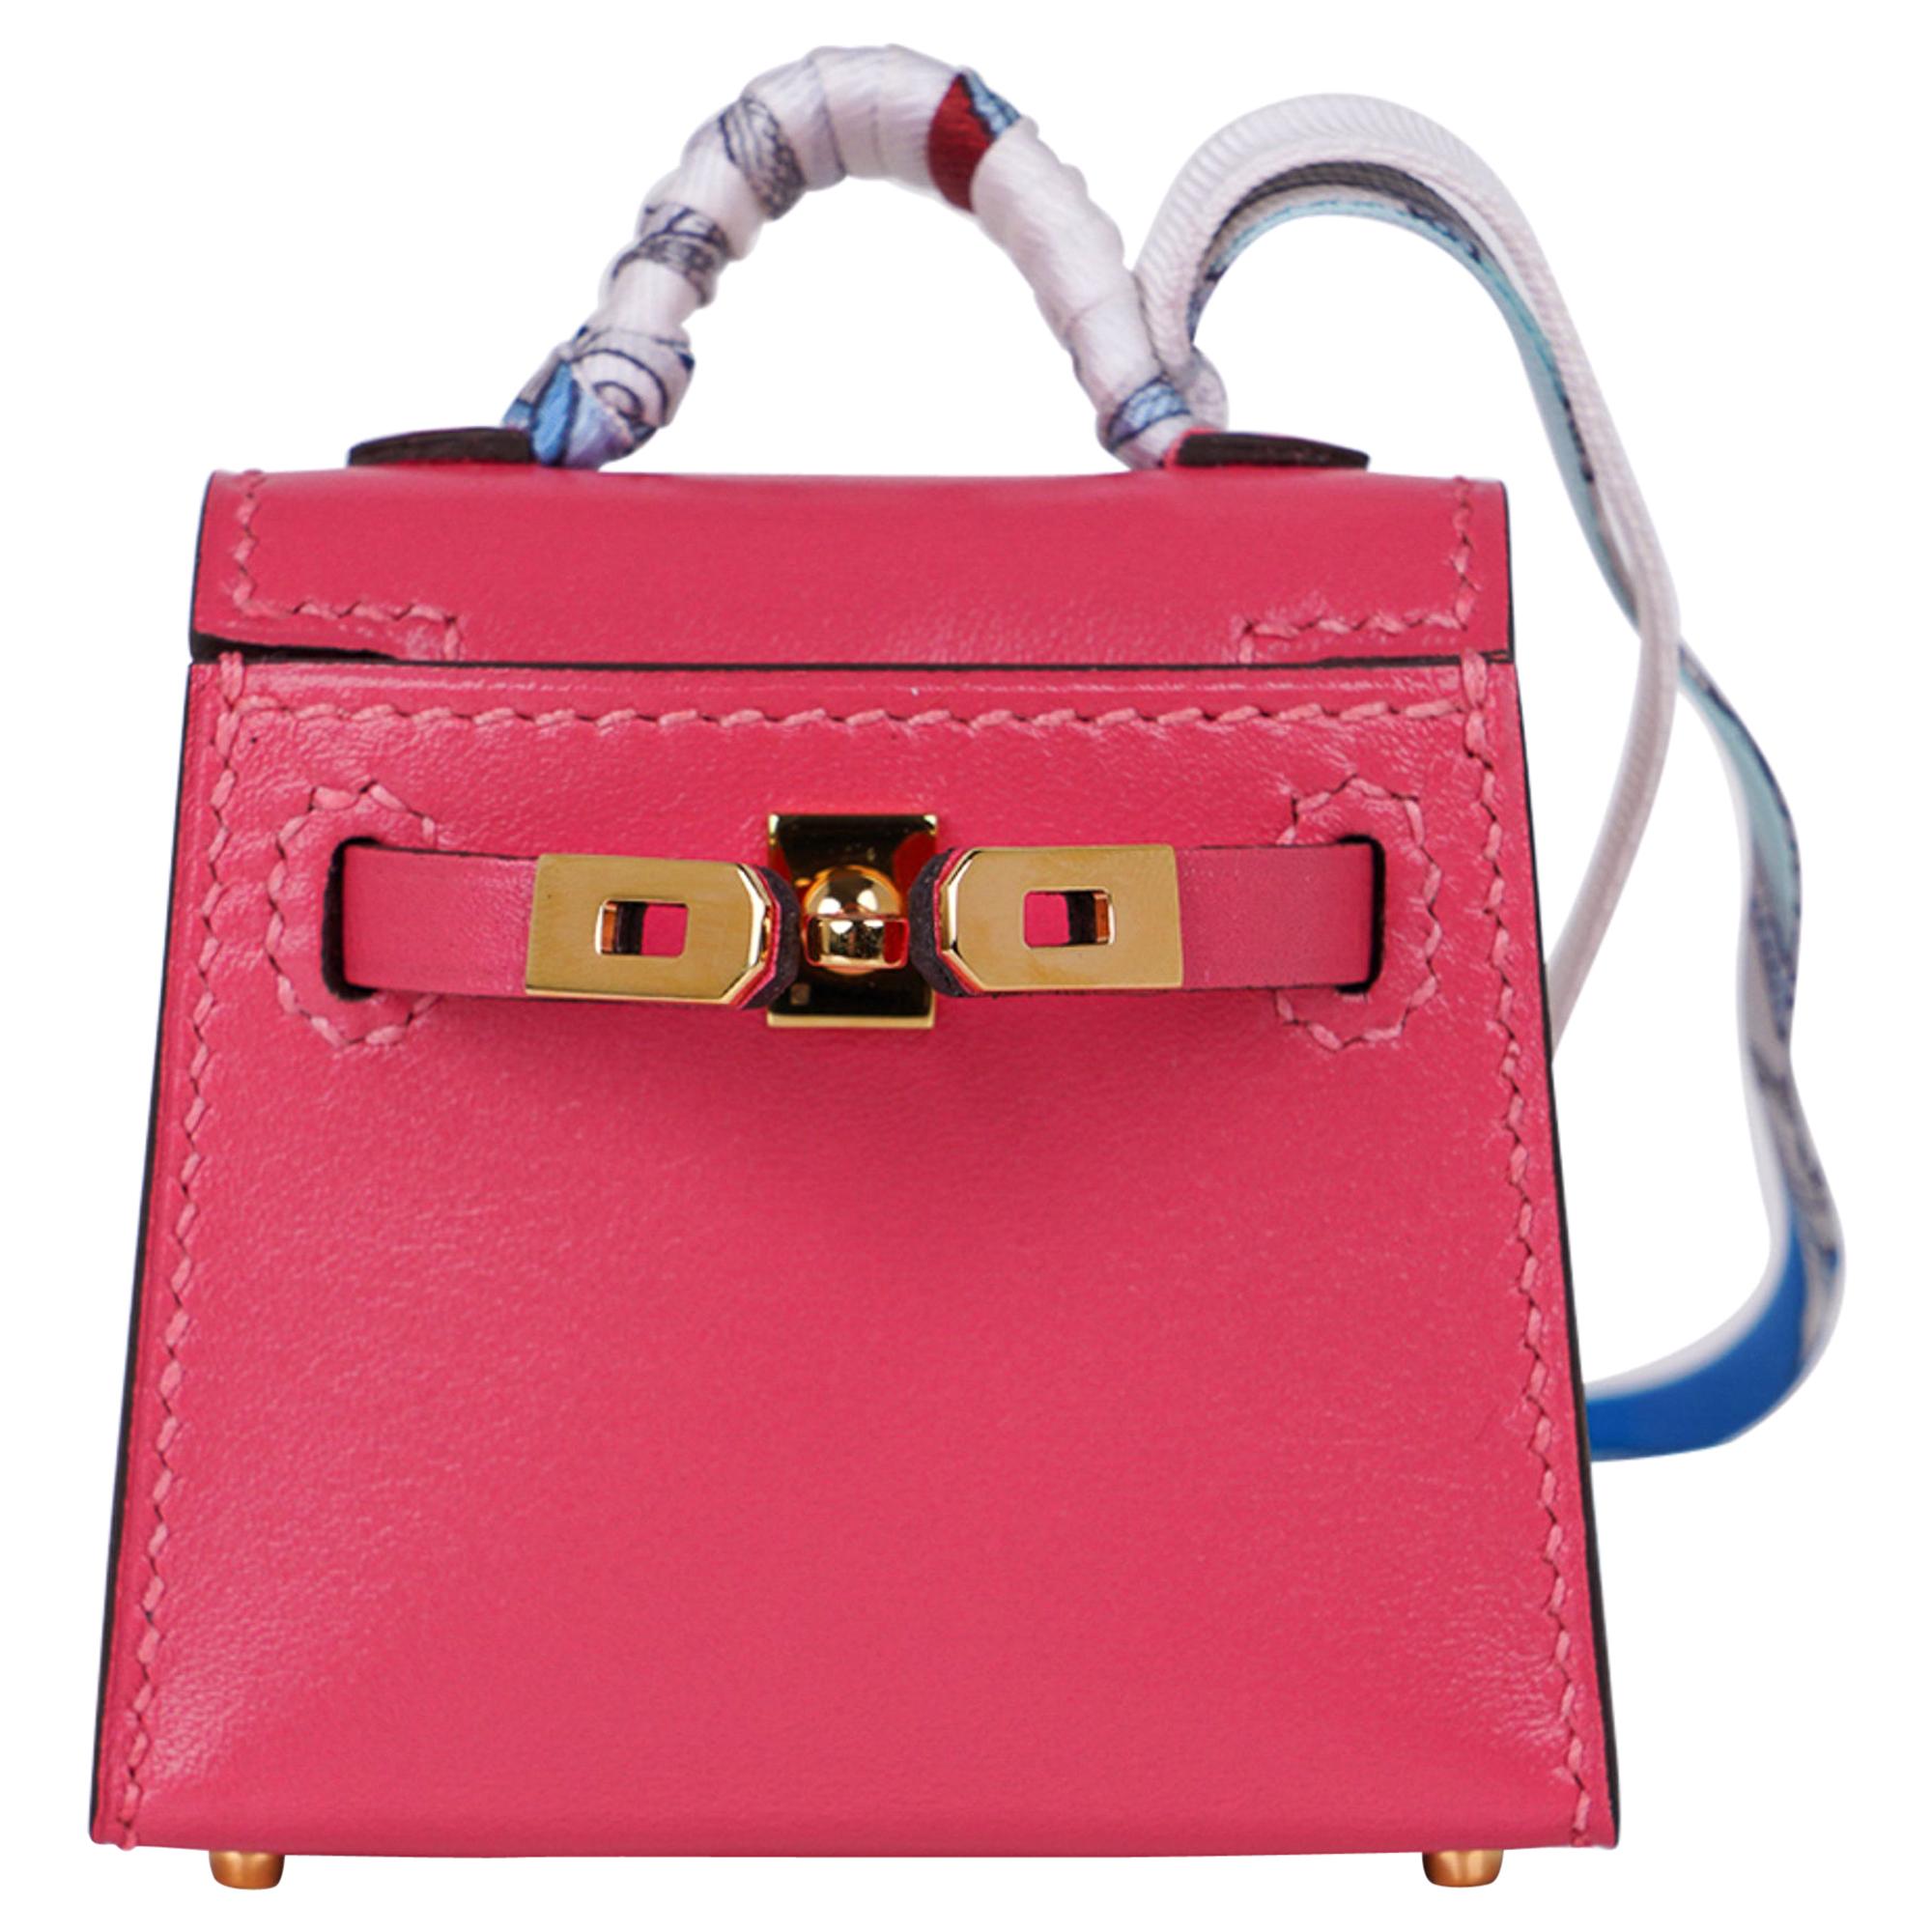 Mightychic offers a very rare limited edition Hermes Kelly Twilly Bag Charm features a miniature Kelly in Rose Lipstick.
Shaped like a Kelly Bag crafted in amazing detail.
The charm has Gold Hardware and a wrapped handle in a silk print